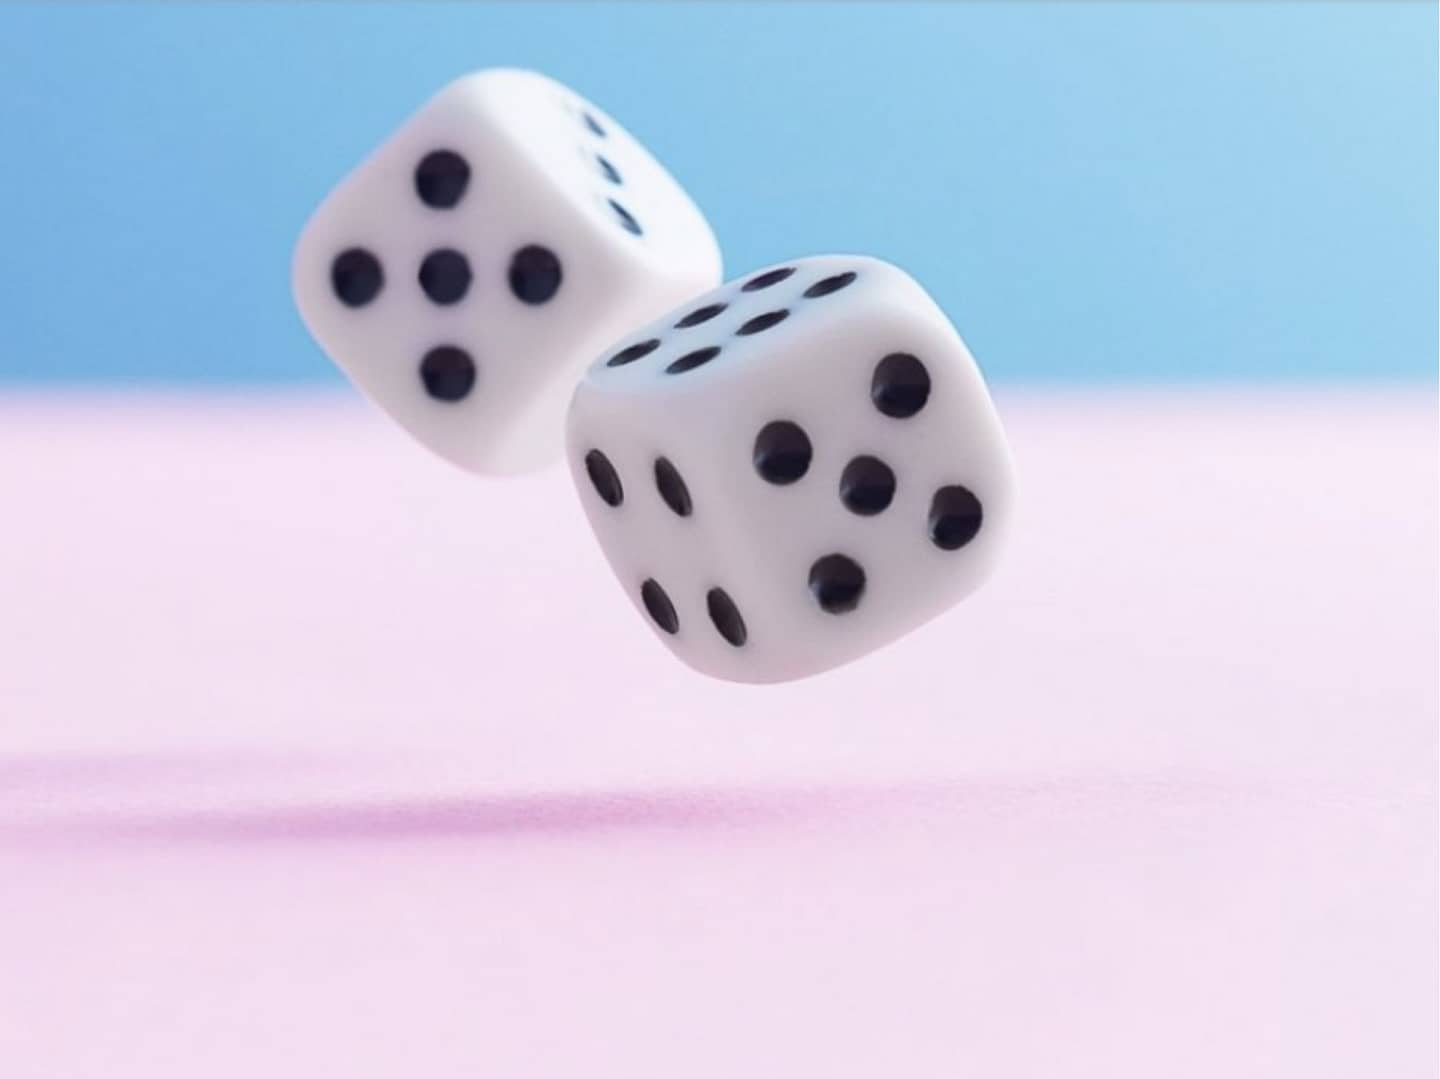 Two White Dices With a Light Blue Background